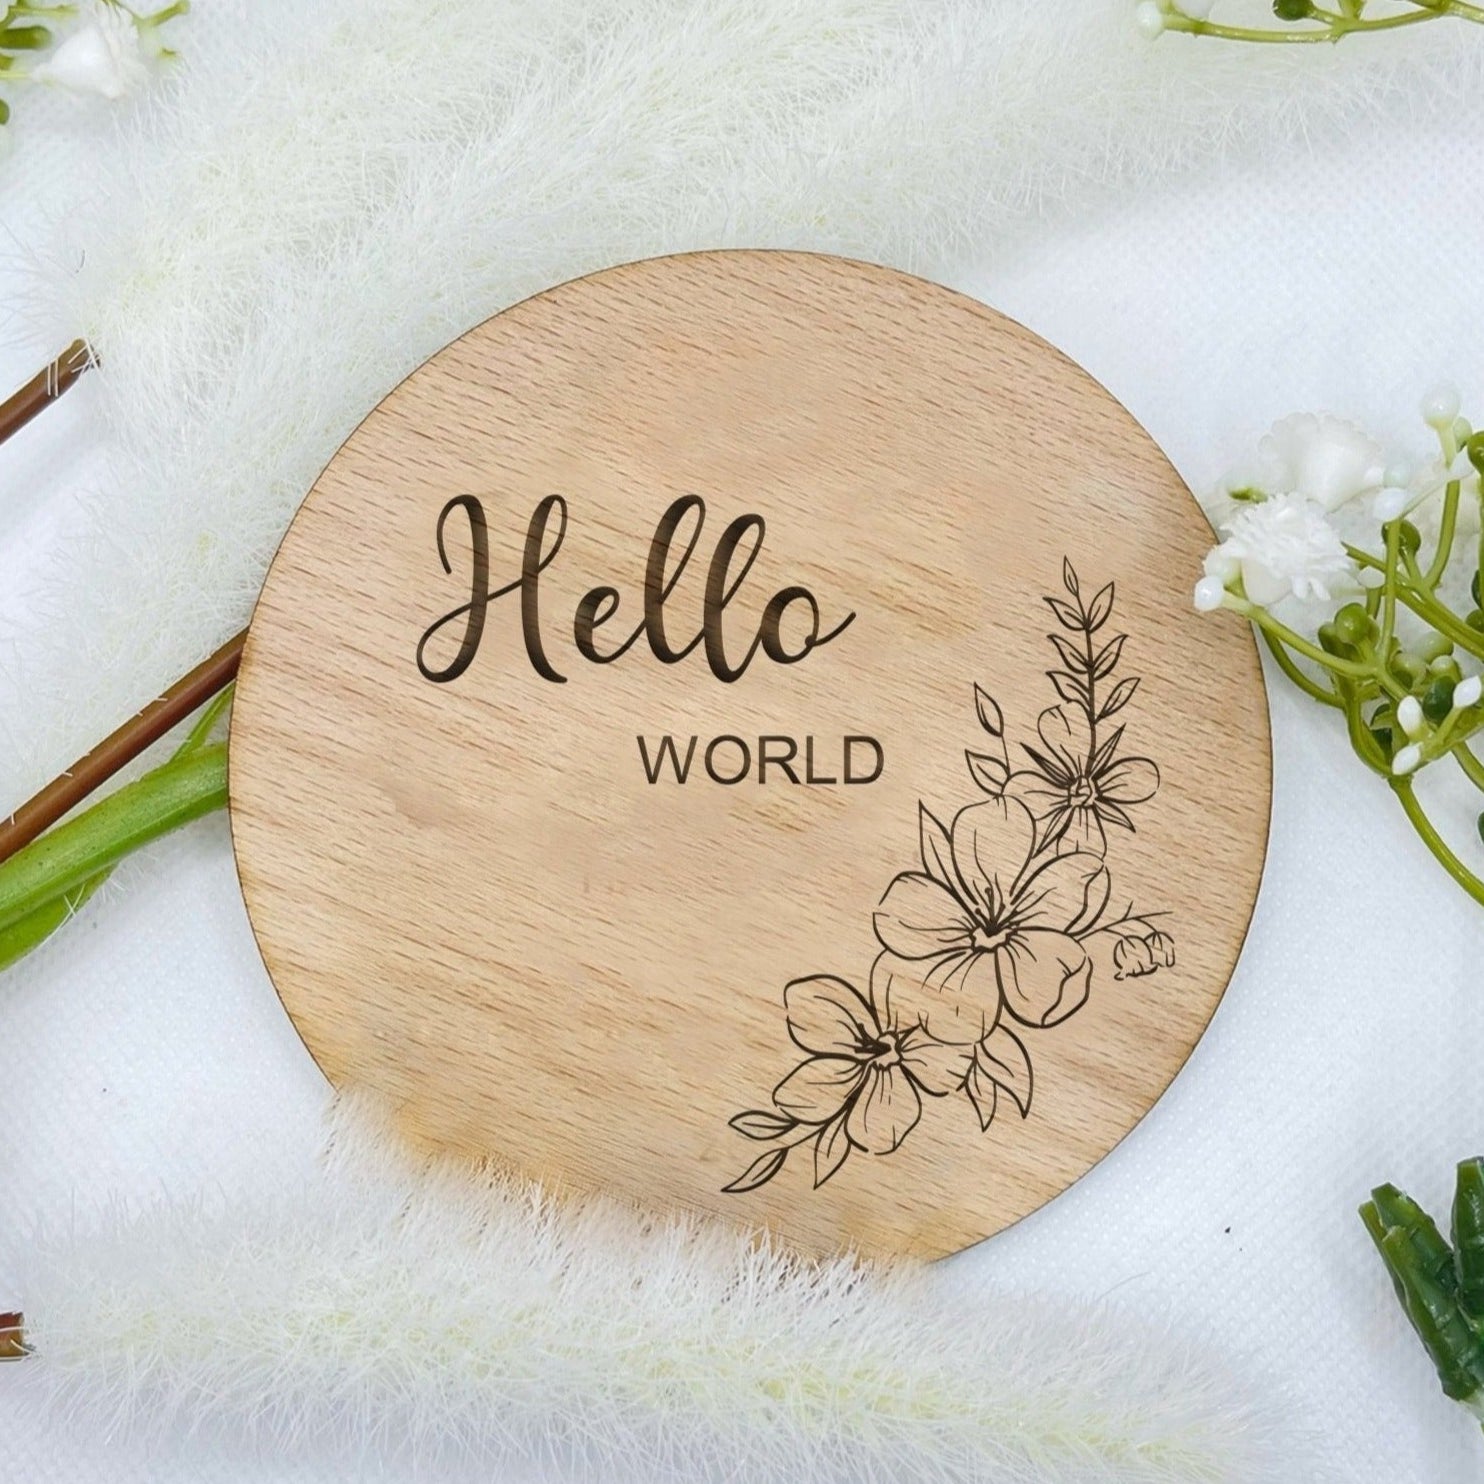 Unveil your joy with our Hello World Baby Announcement Plaque – a charming keepsake adorned with a beautiful roses design, perfect for capturing and cherishing precious moments.